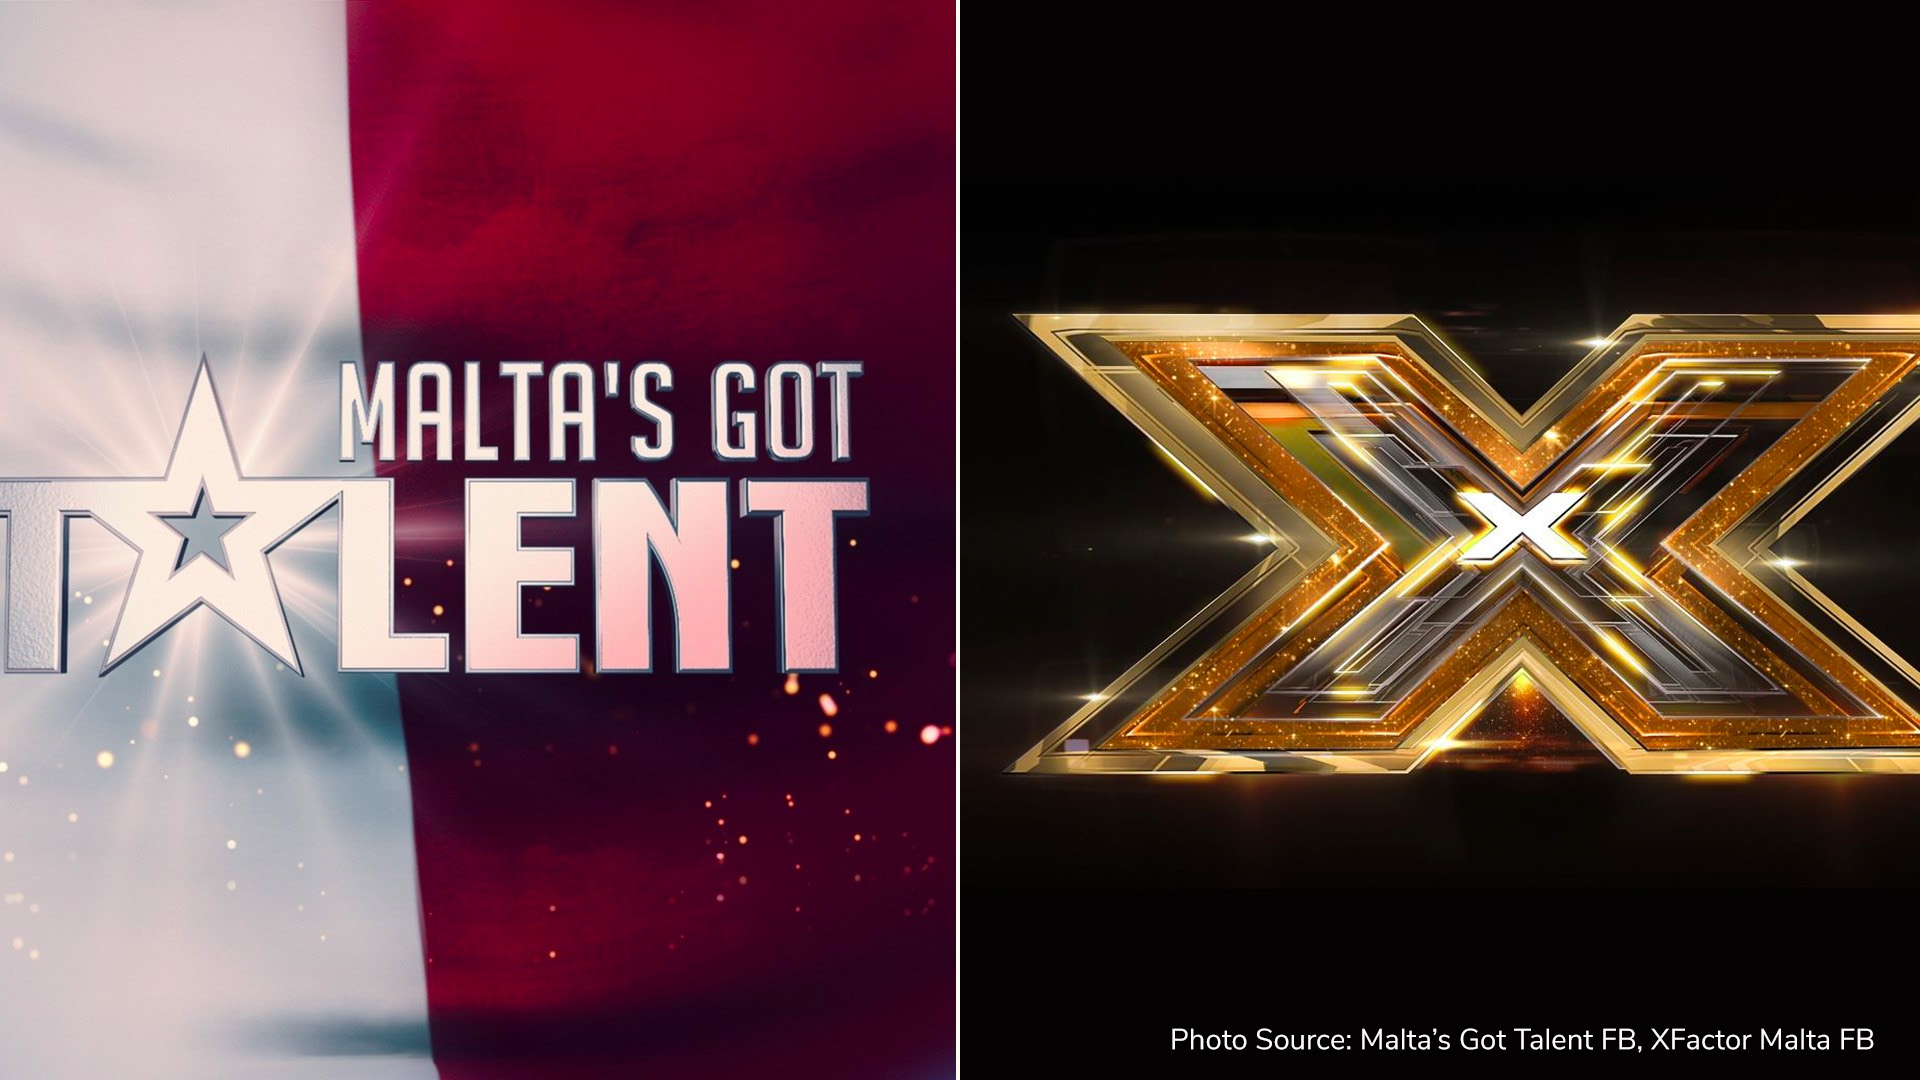 Malta's Got Talent and X-Factor are here to stay